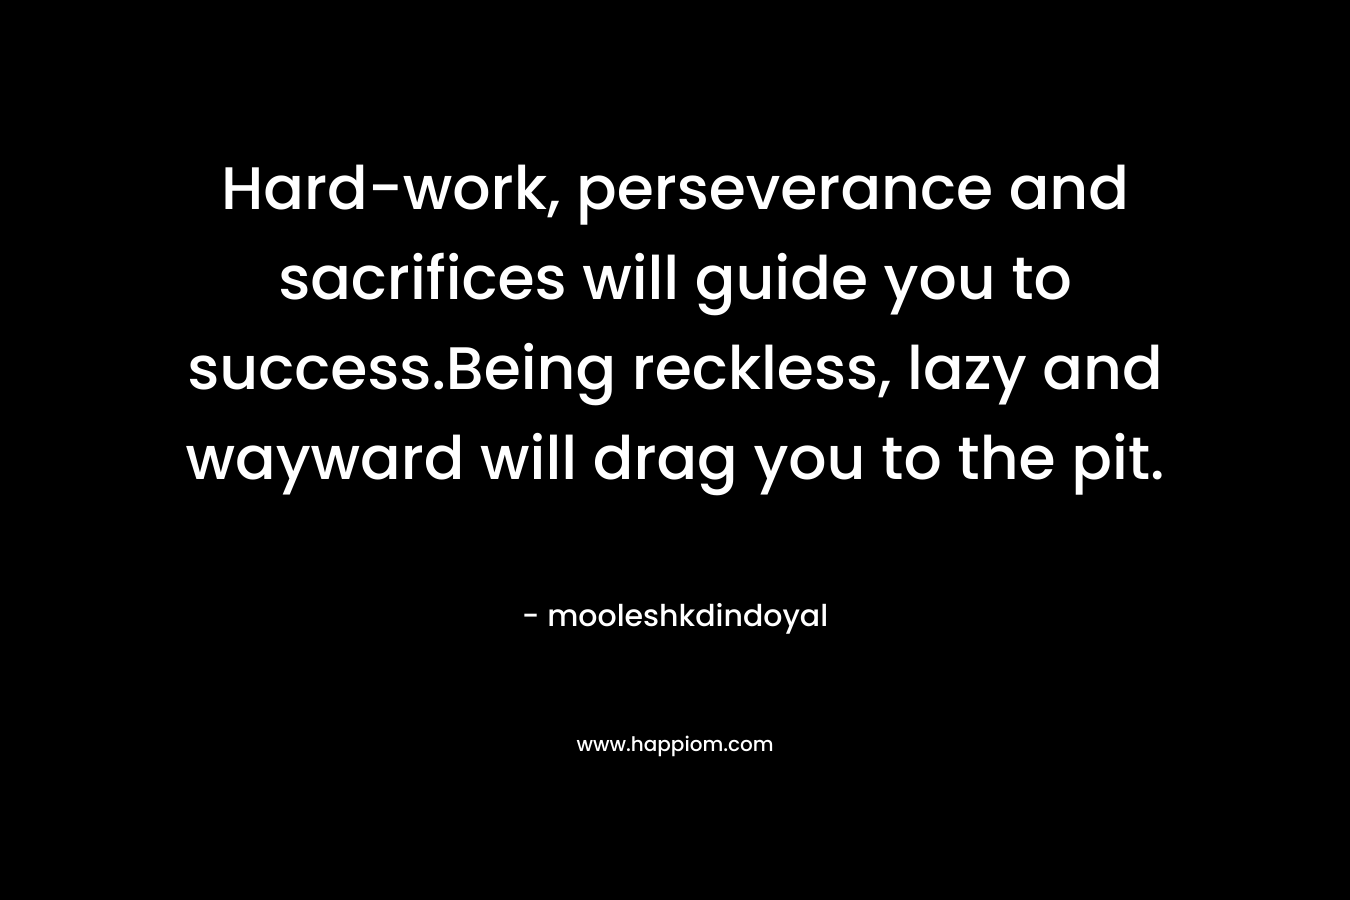 Hard-work, perseverance and sacrifices will guide you to success.Being reckless, lazy and wayward will drag you to the pit. – mooleshkdindoyal